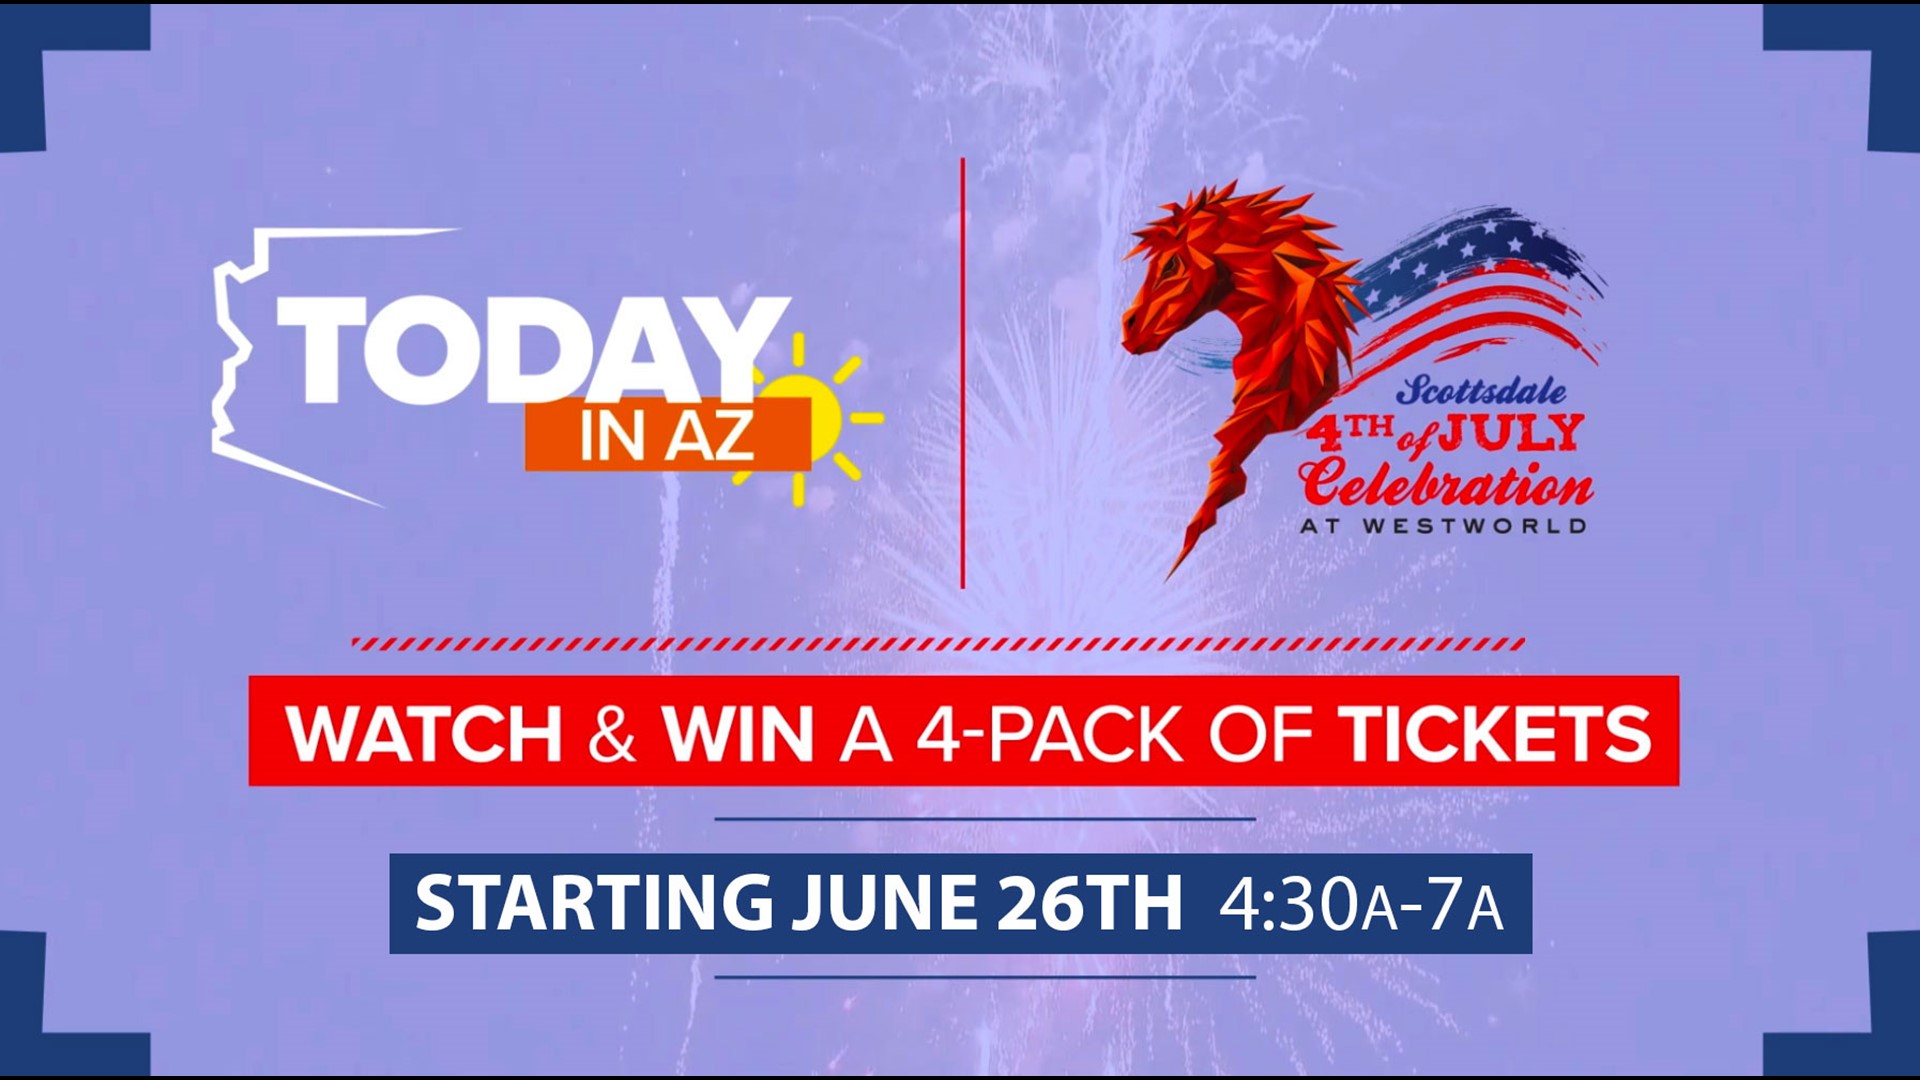 Win 4 tickets to the Scottsdale July 4th celebration at Westworld